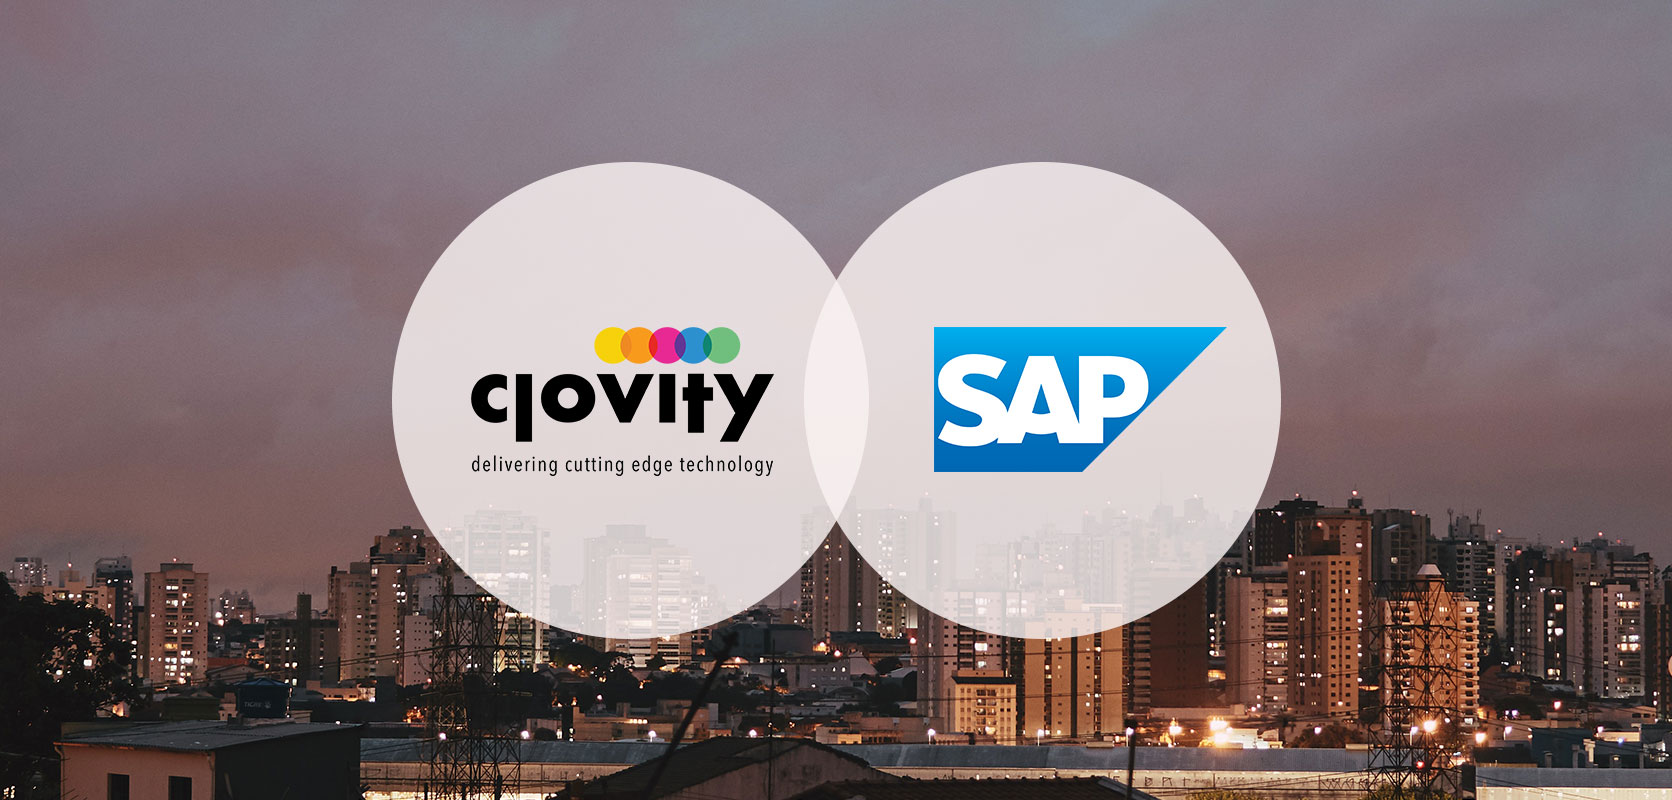 Clovity Expands Its Enterprise Application Practice Areas to Leverage the Robust Set of SAP Applications to Further Invigorate Enterprise Digital Transformations